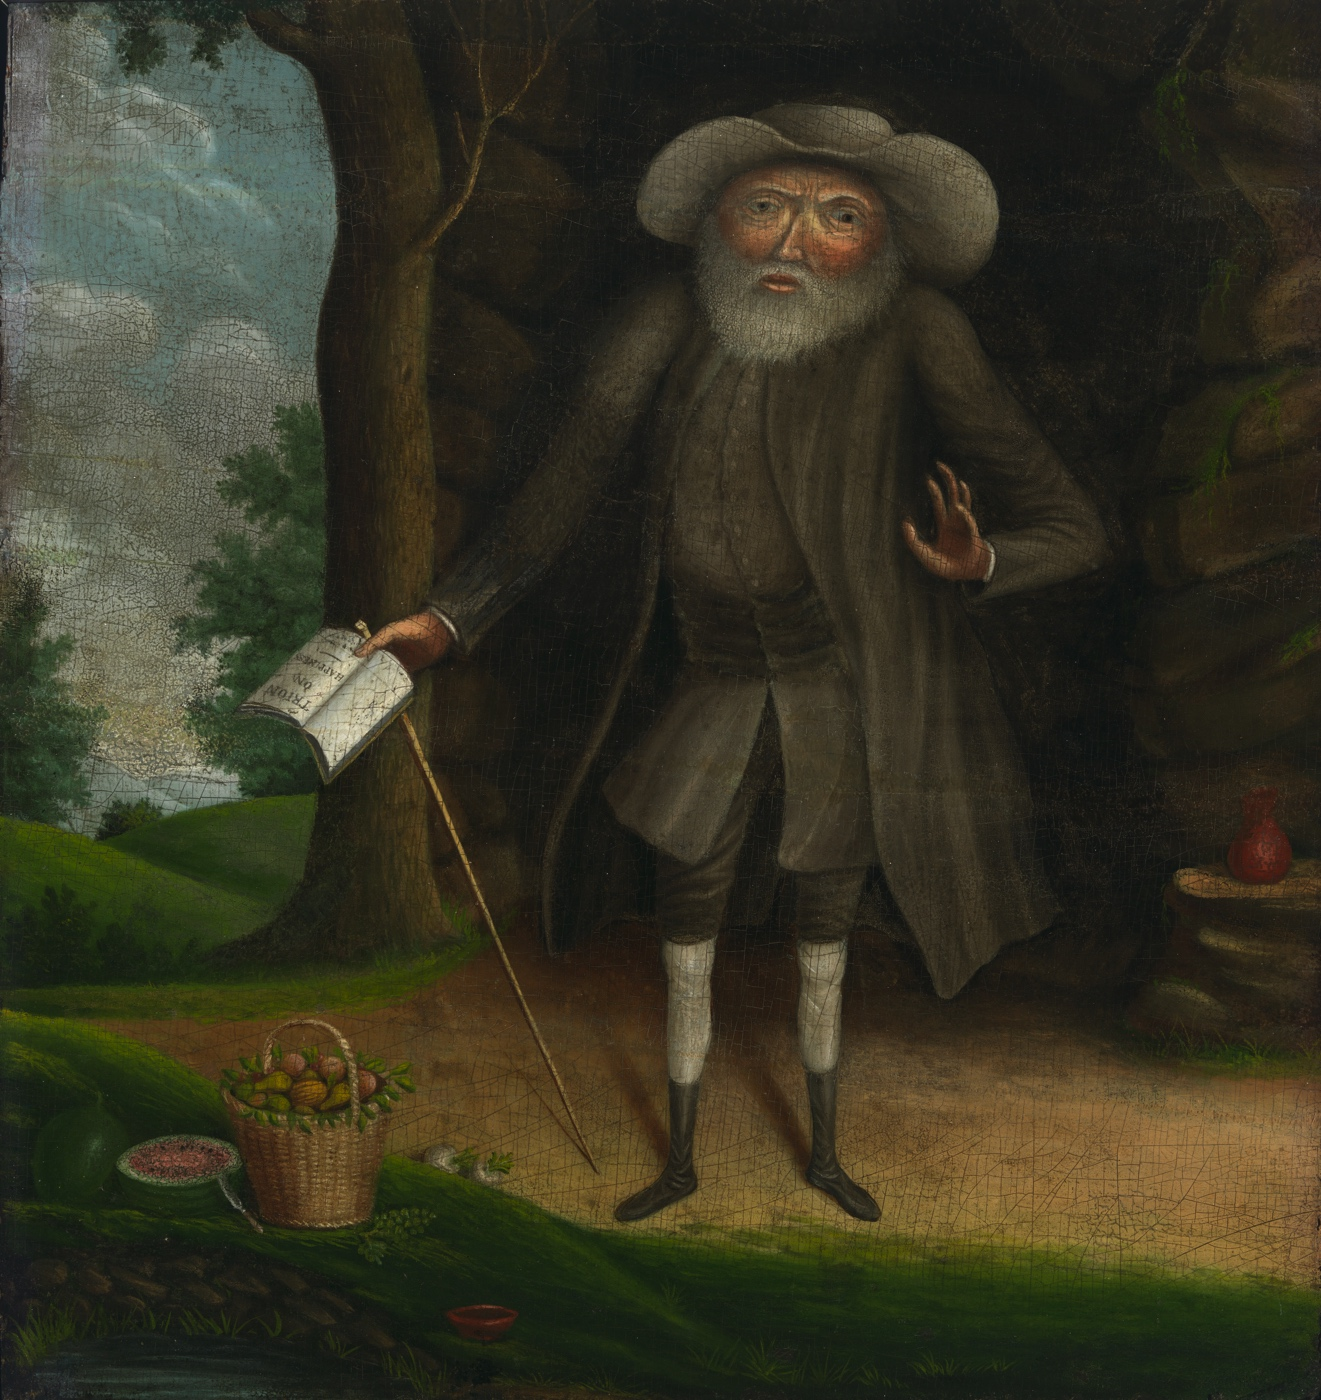 Image of a painting showing an older man with a white beard standing outside with a cane and book in his right hand